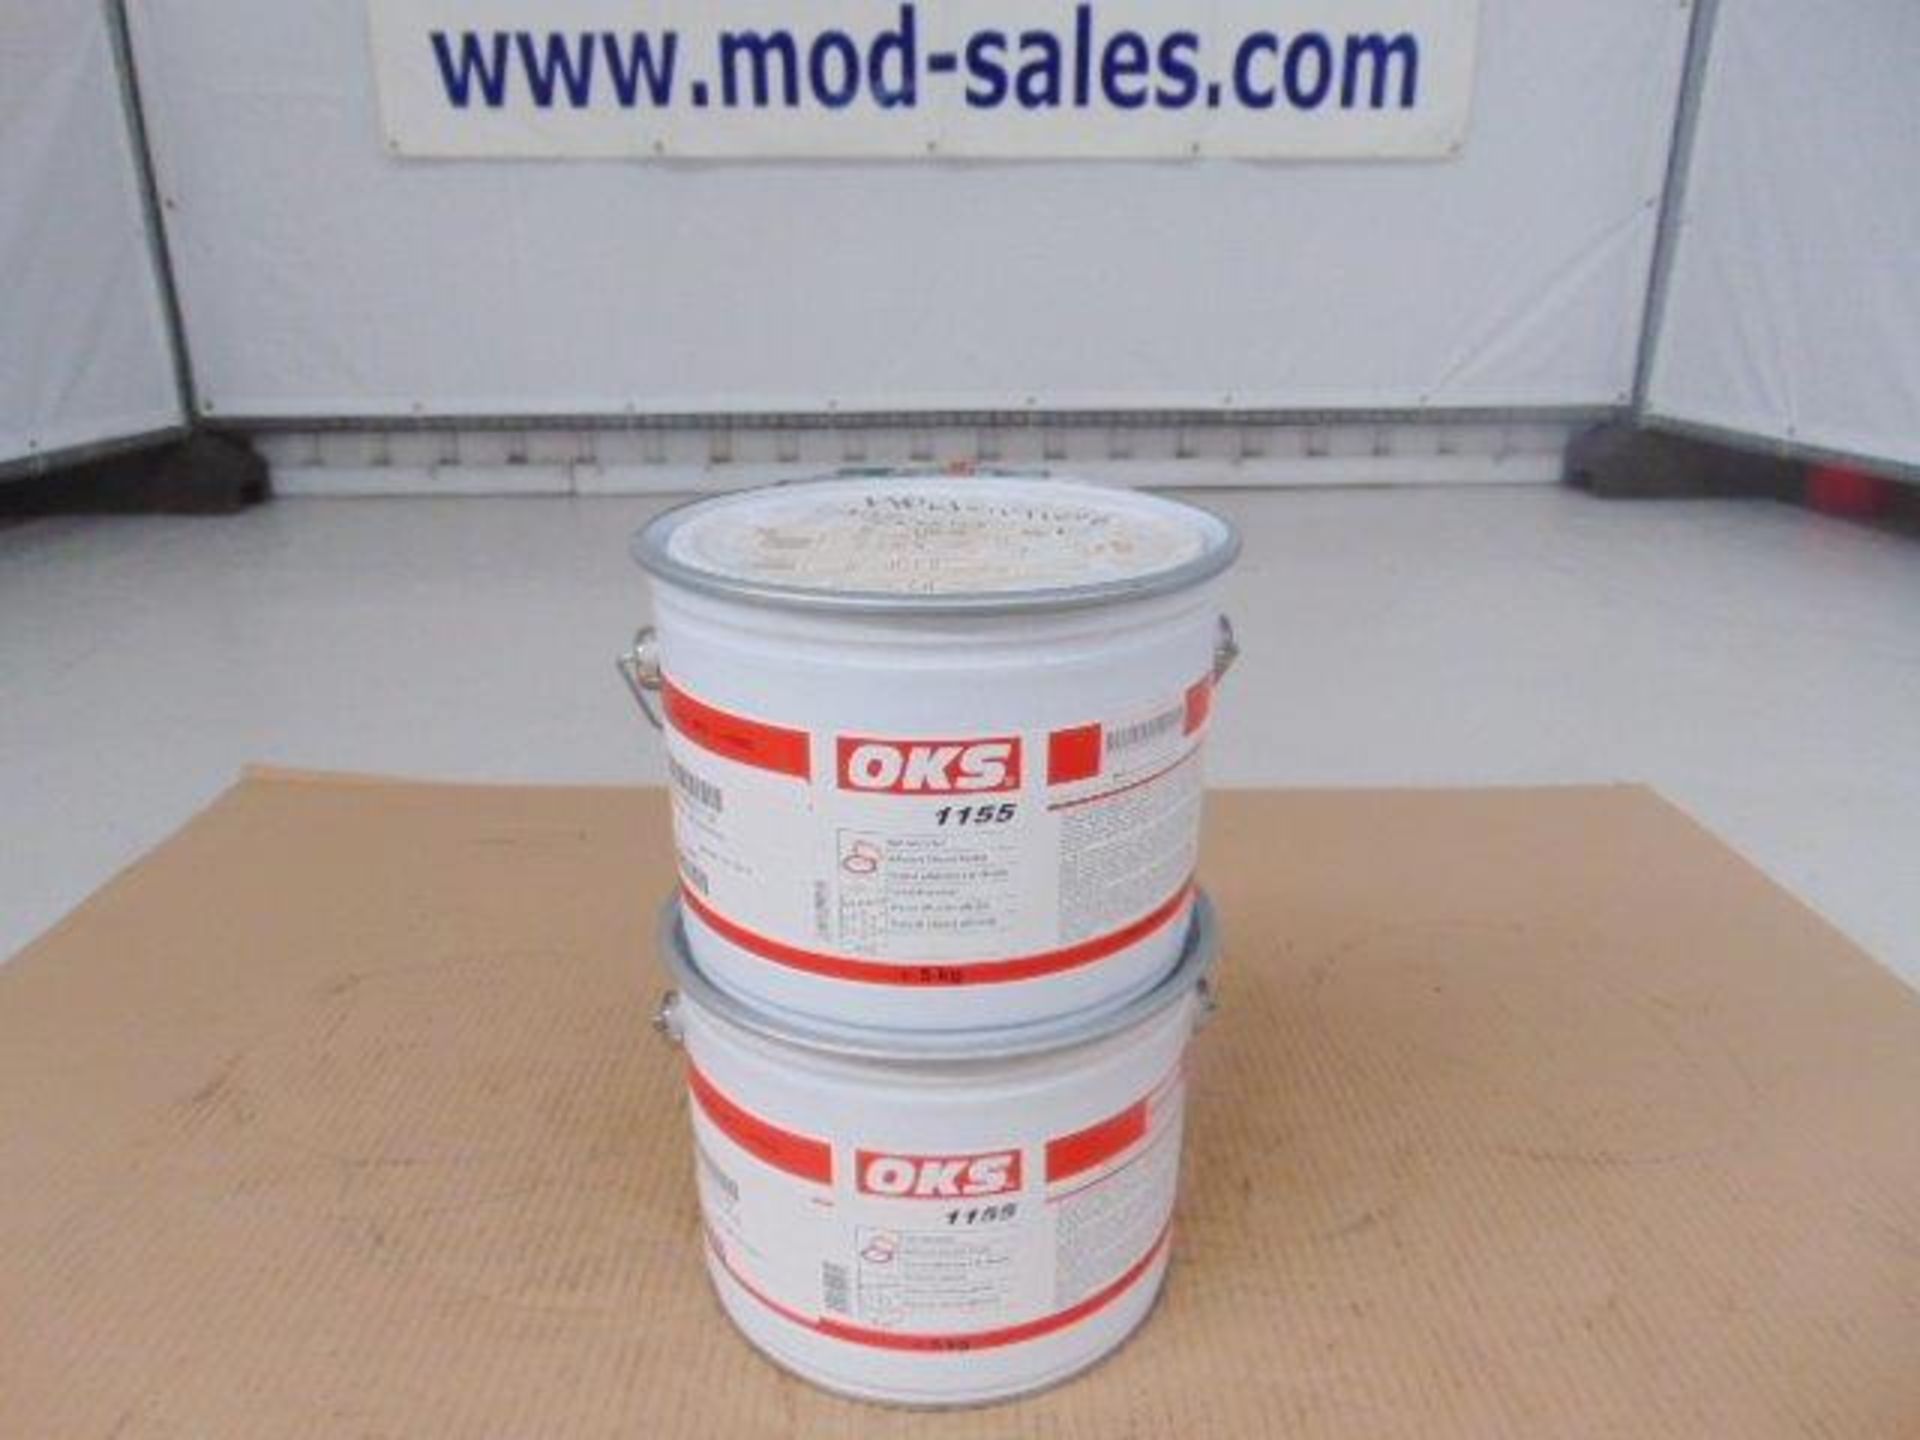 2 x 5Kg Tins of OKS 1155 Adherent Silicone Grease